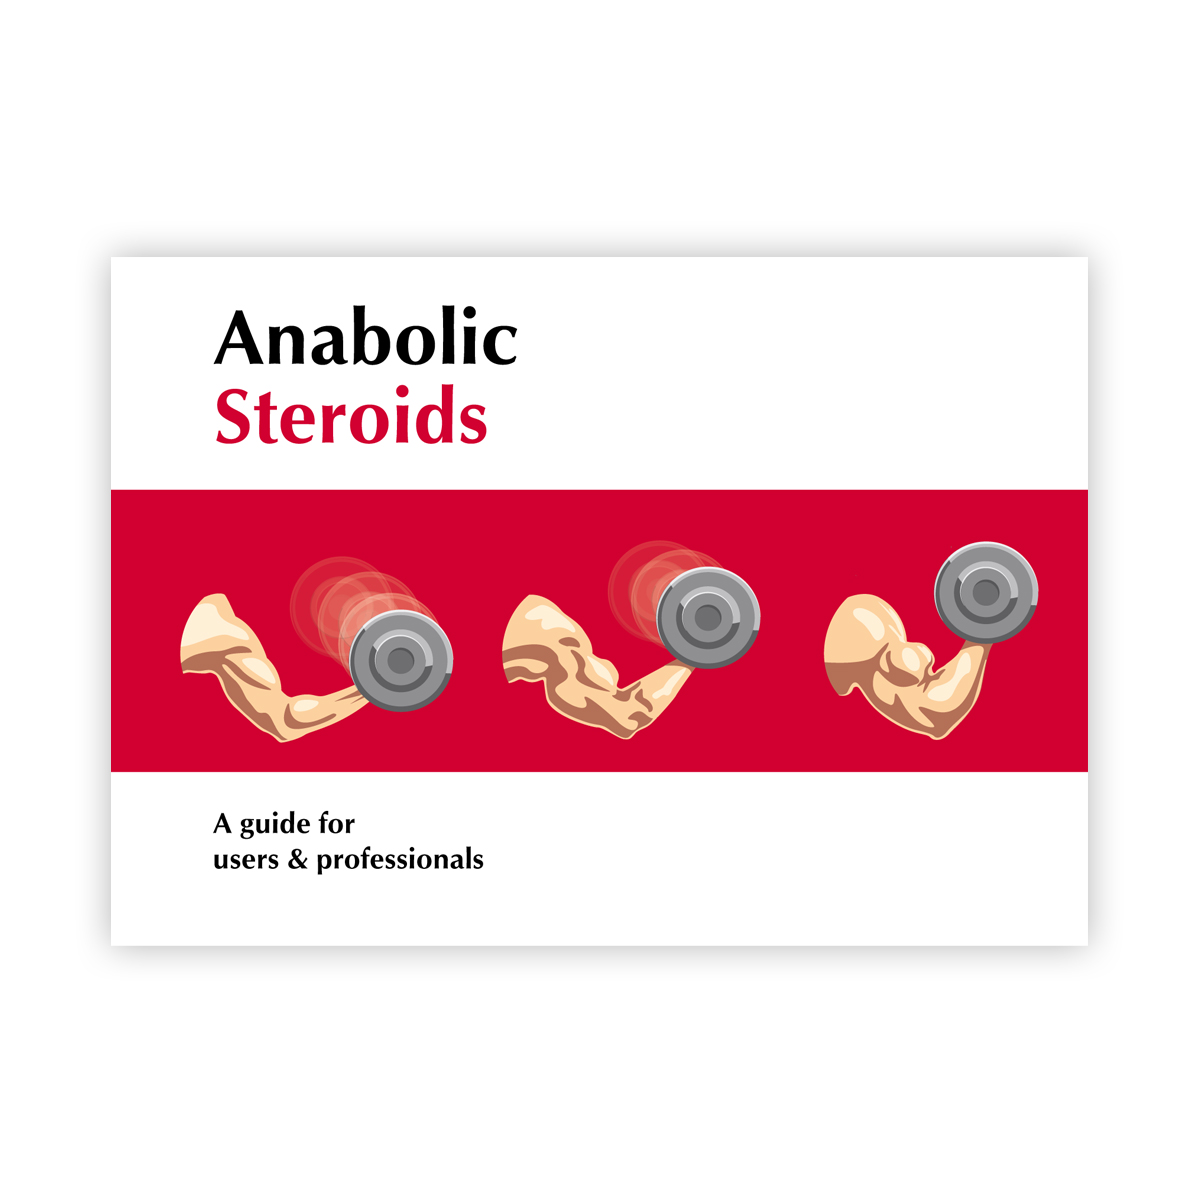 Anabolic Steroids - guide for users & drug workers 